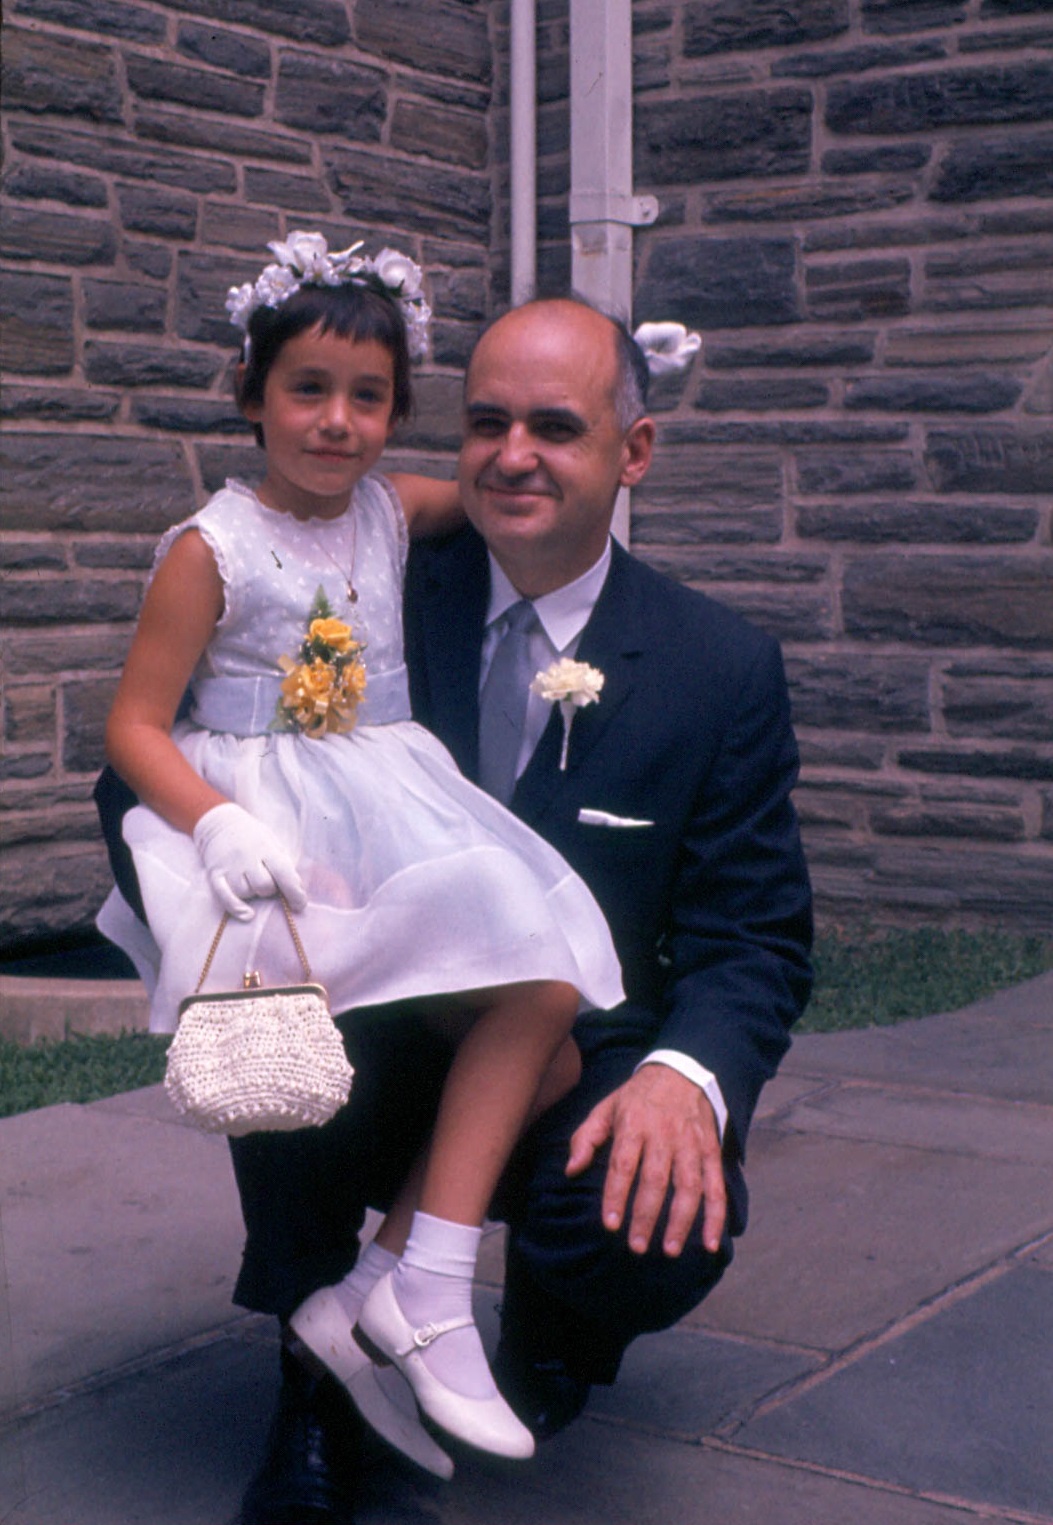 Dr. Hilleman with child